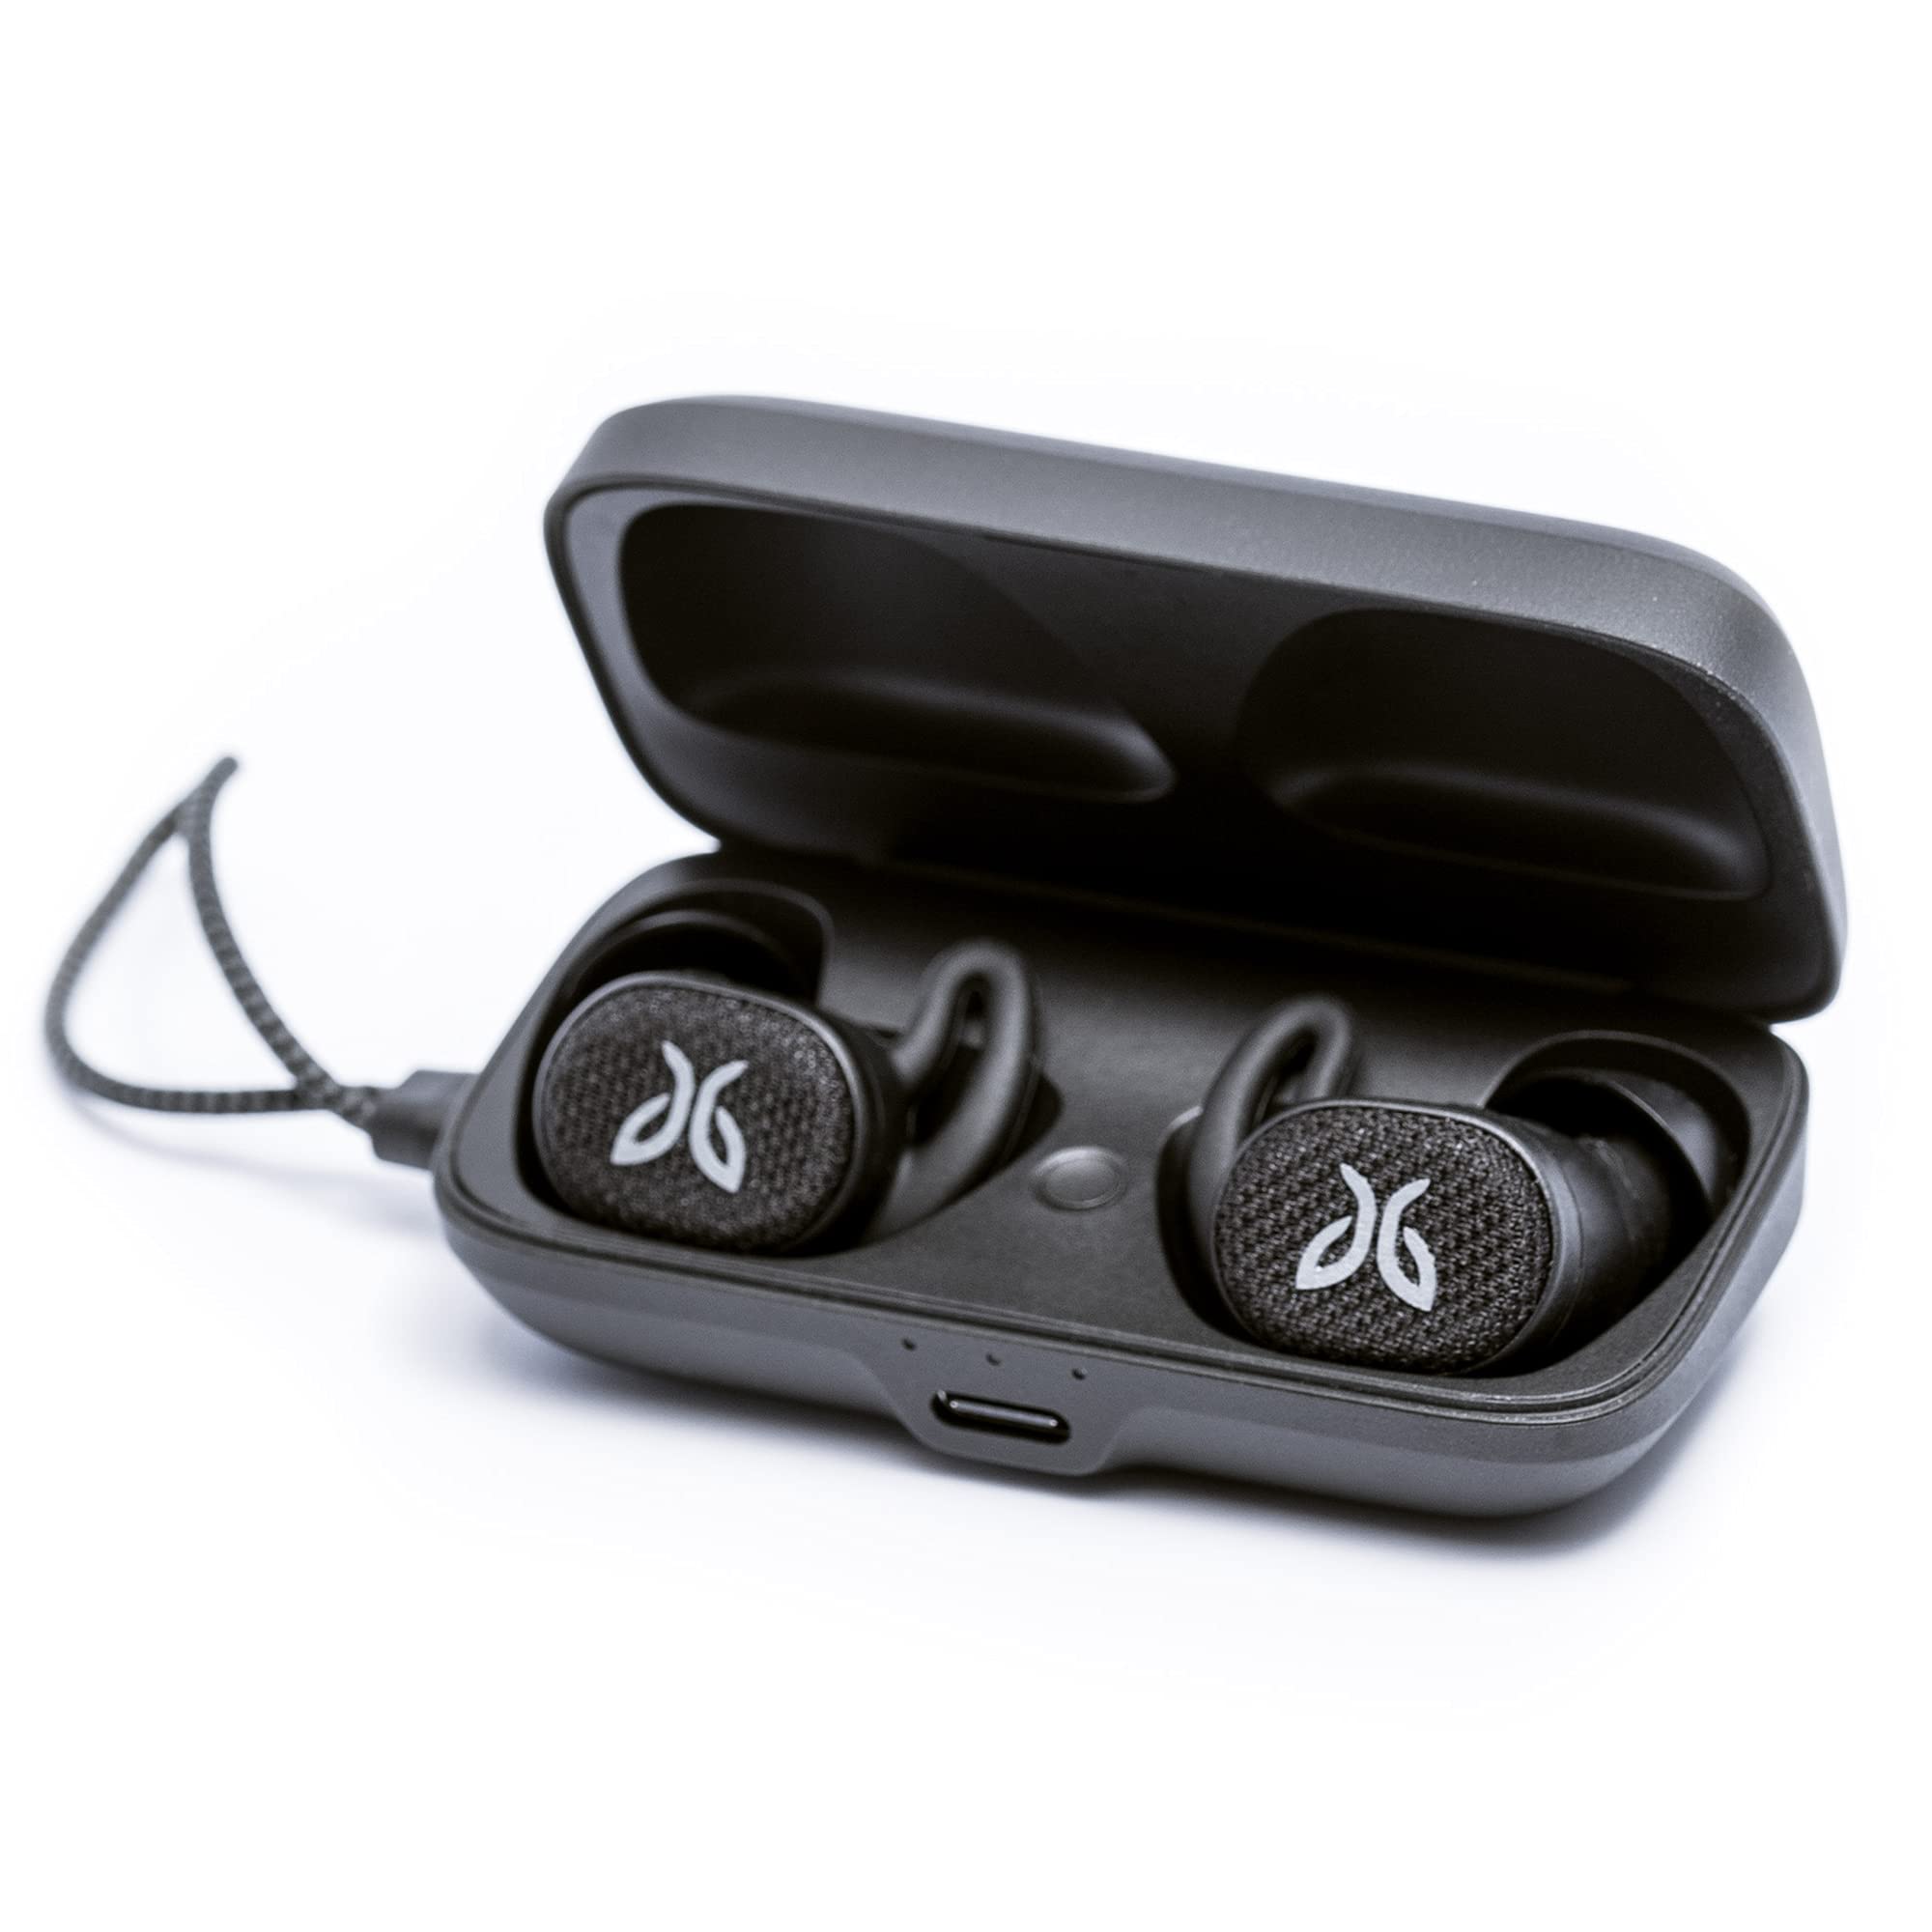 Jaybird Vista 2 True Wireless Sport Bluetooth Headphones with Charging Case - Premium Sound, ANC, Sport Fit, 24 Hour Battery, Waterproof Earbuds with Military-Grade Durability